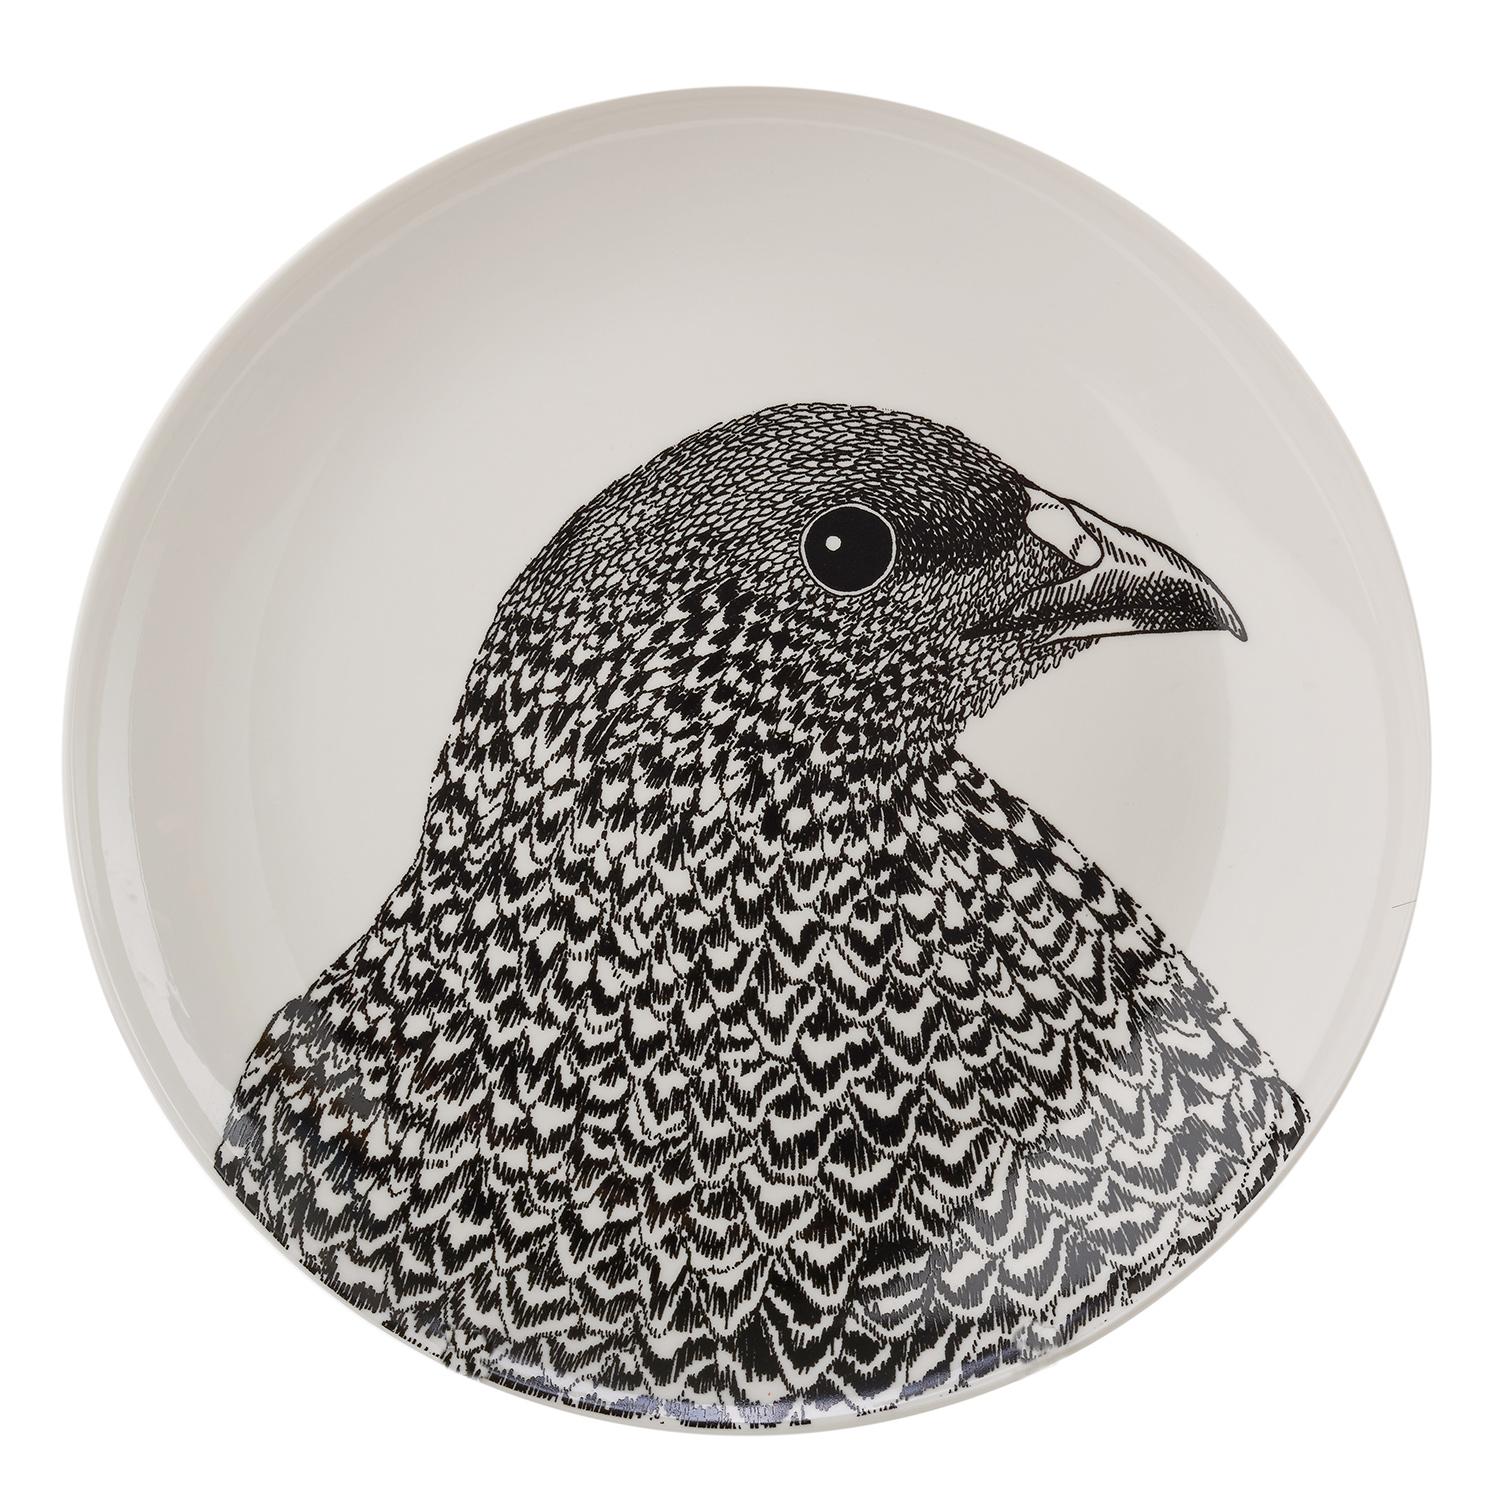 Porcelain Dinner Plates with Animal Portrait Decals 2